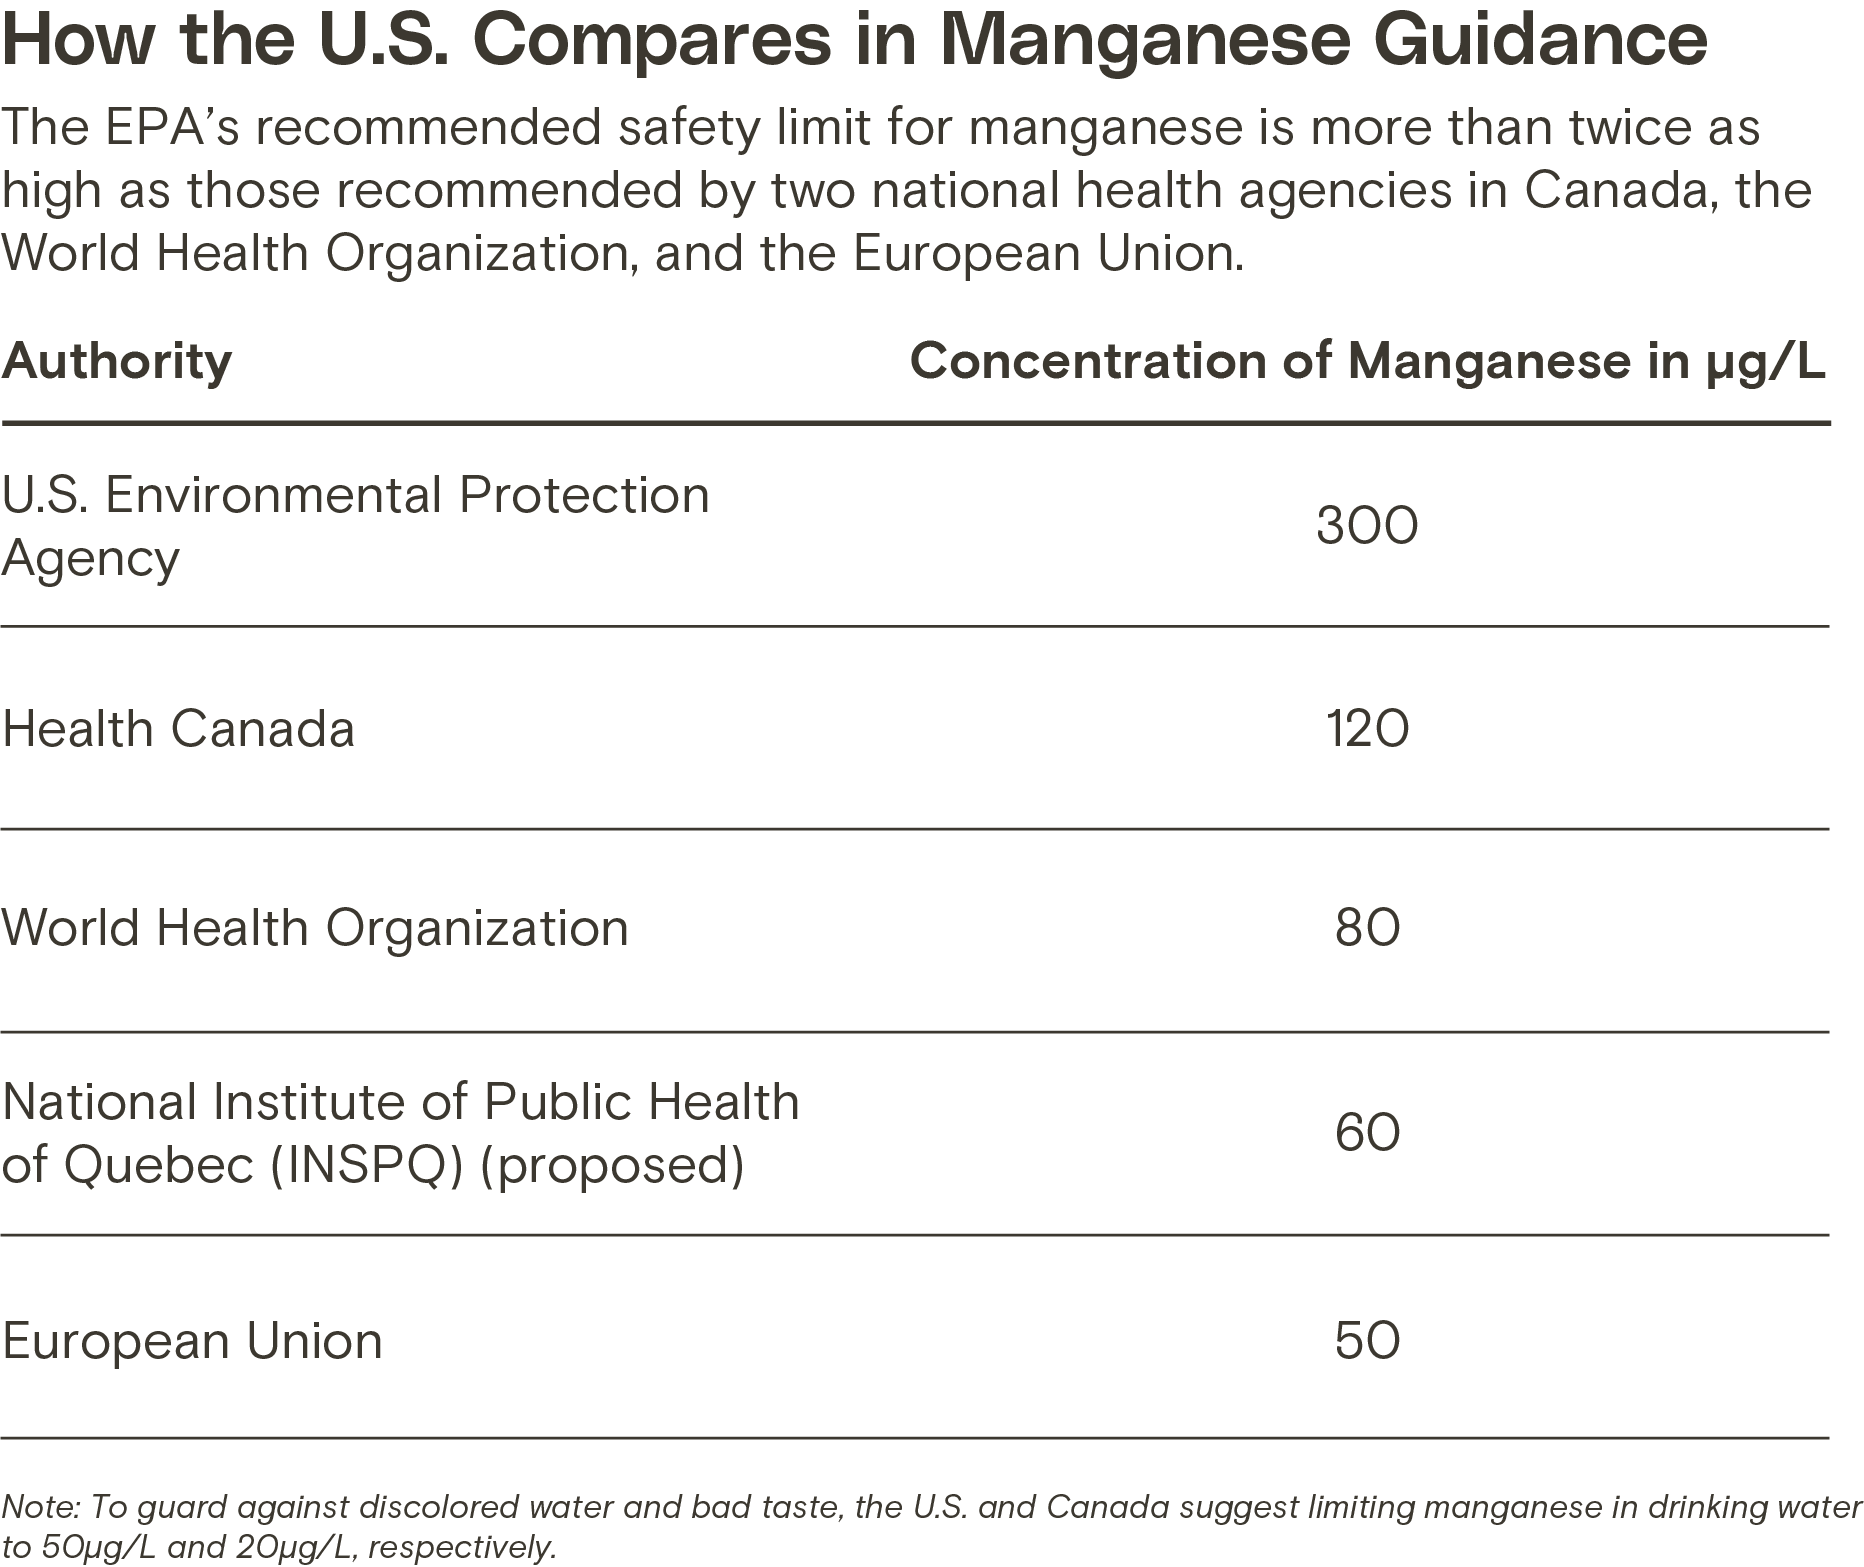 A table showing how the U.S. compares in manganese guidance. The EPA's recommended safety limit for manganese is more than twice as high as those recommended by two national health agencies in Canada, the World Health Organization, and the European Union.